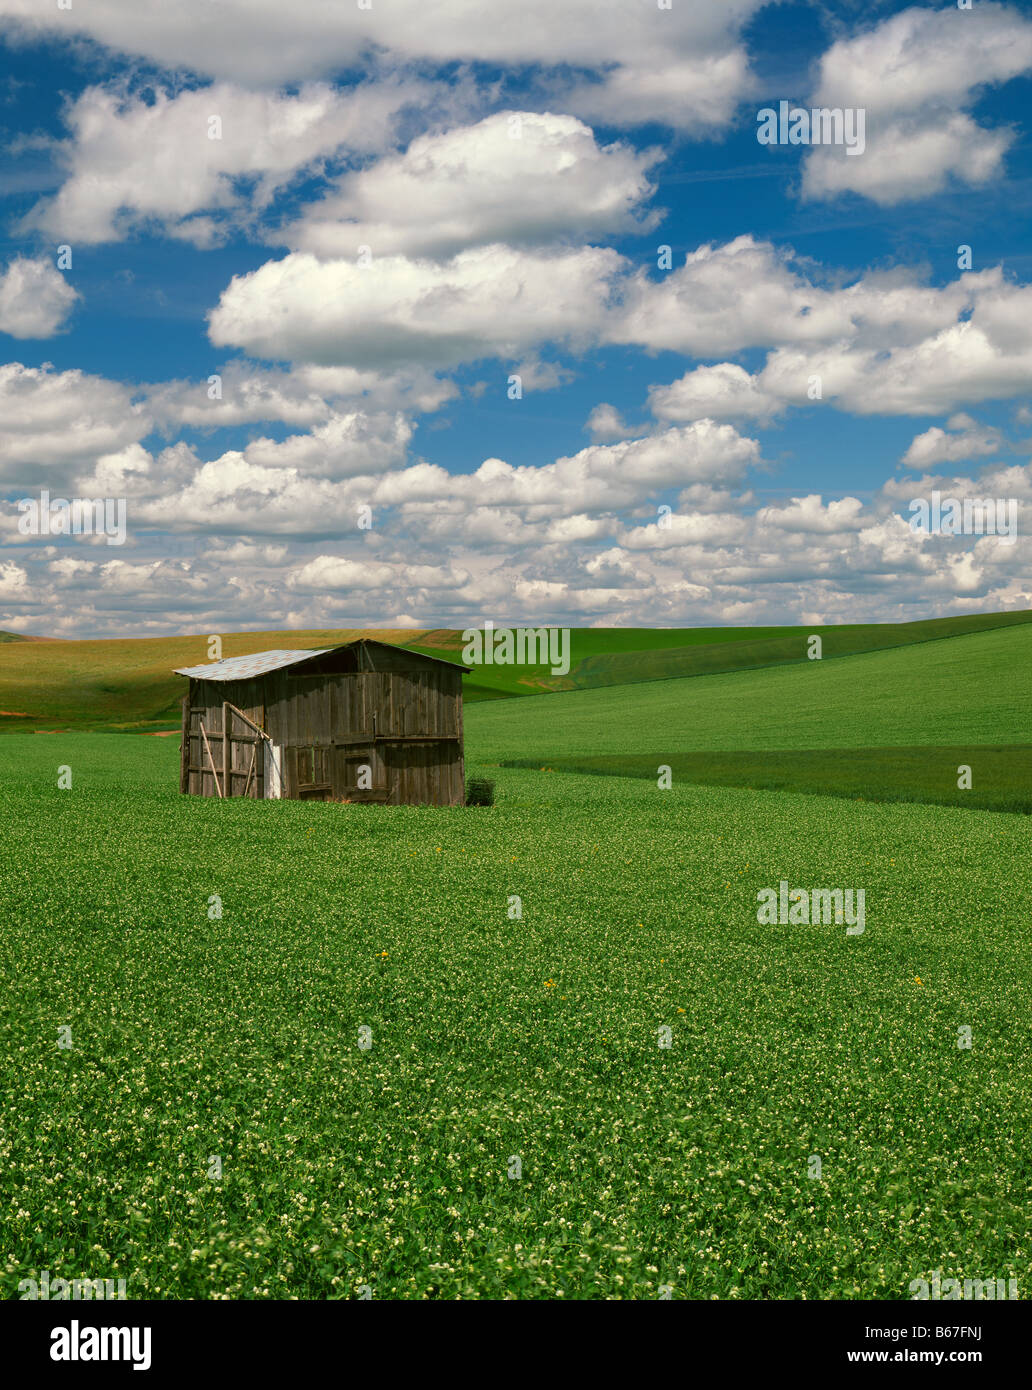 WASHINGTON Old shed in a farm field in the Palouse area of Eastern Washington Stock Photo